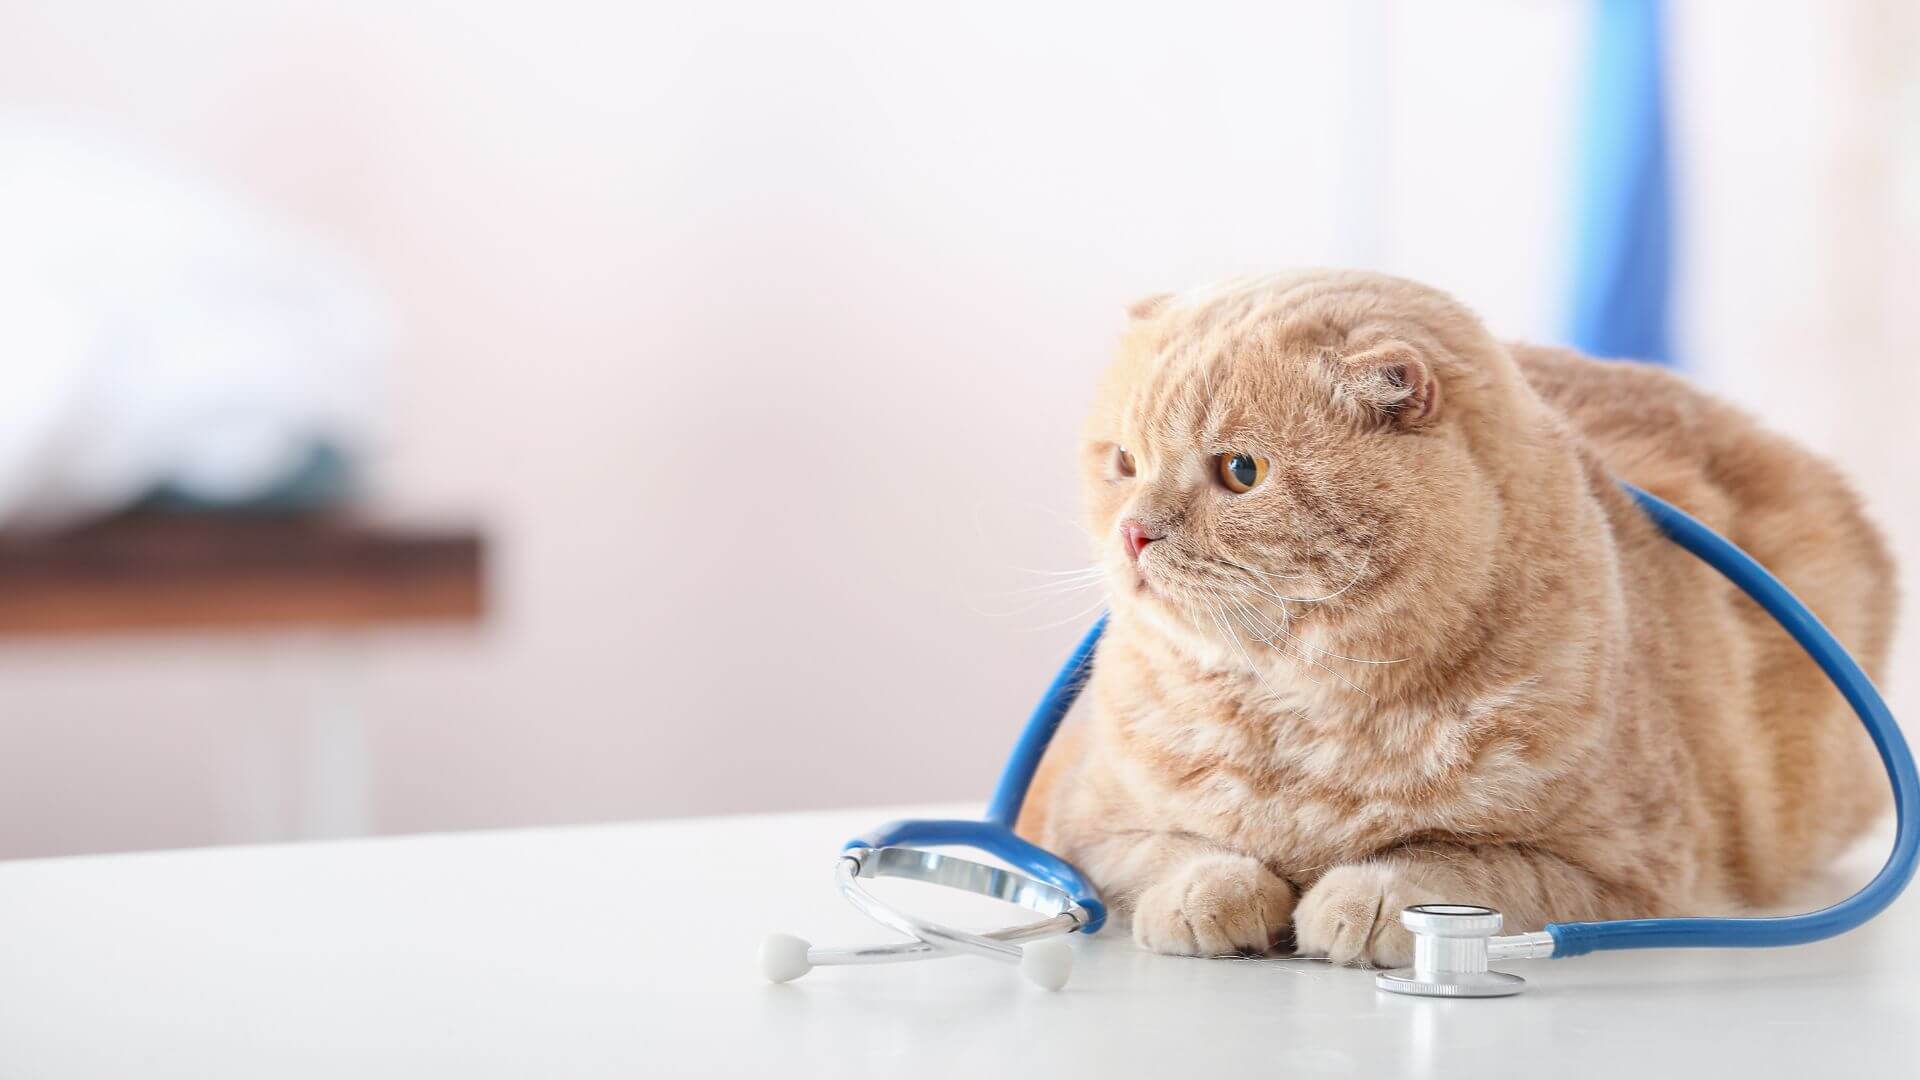 A cat with a stethoscope lying on a table